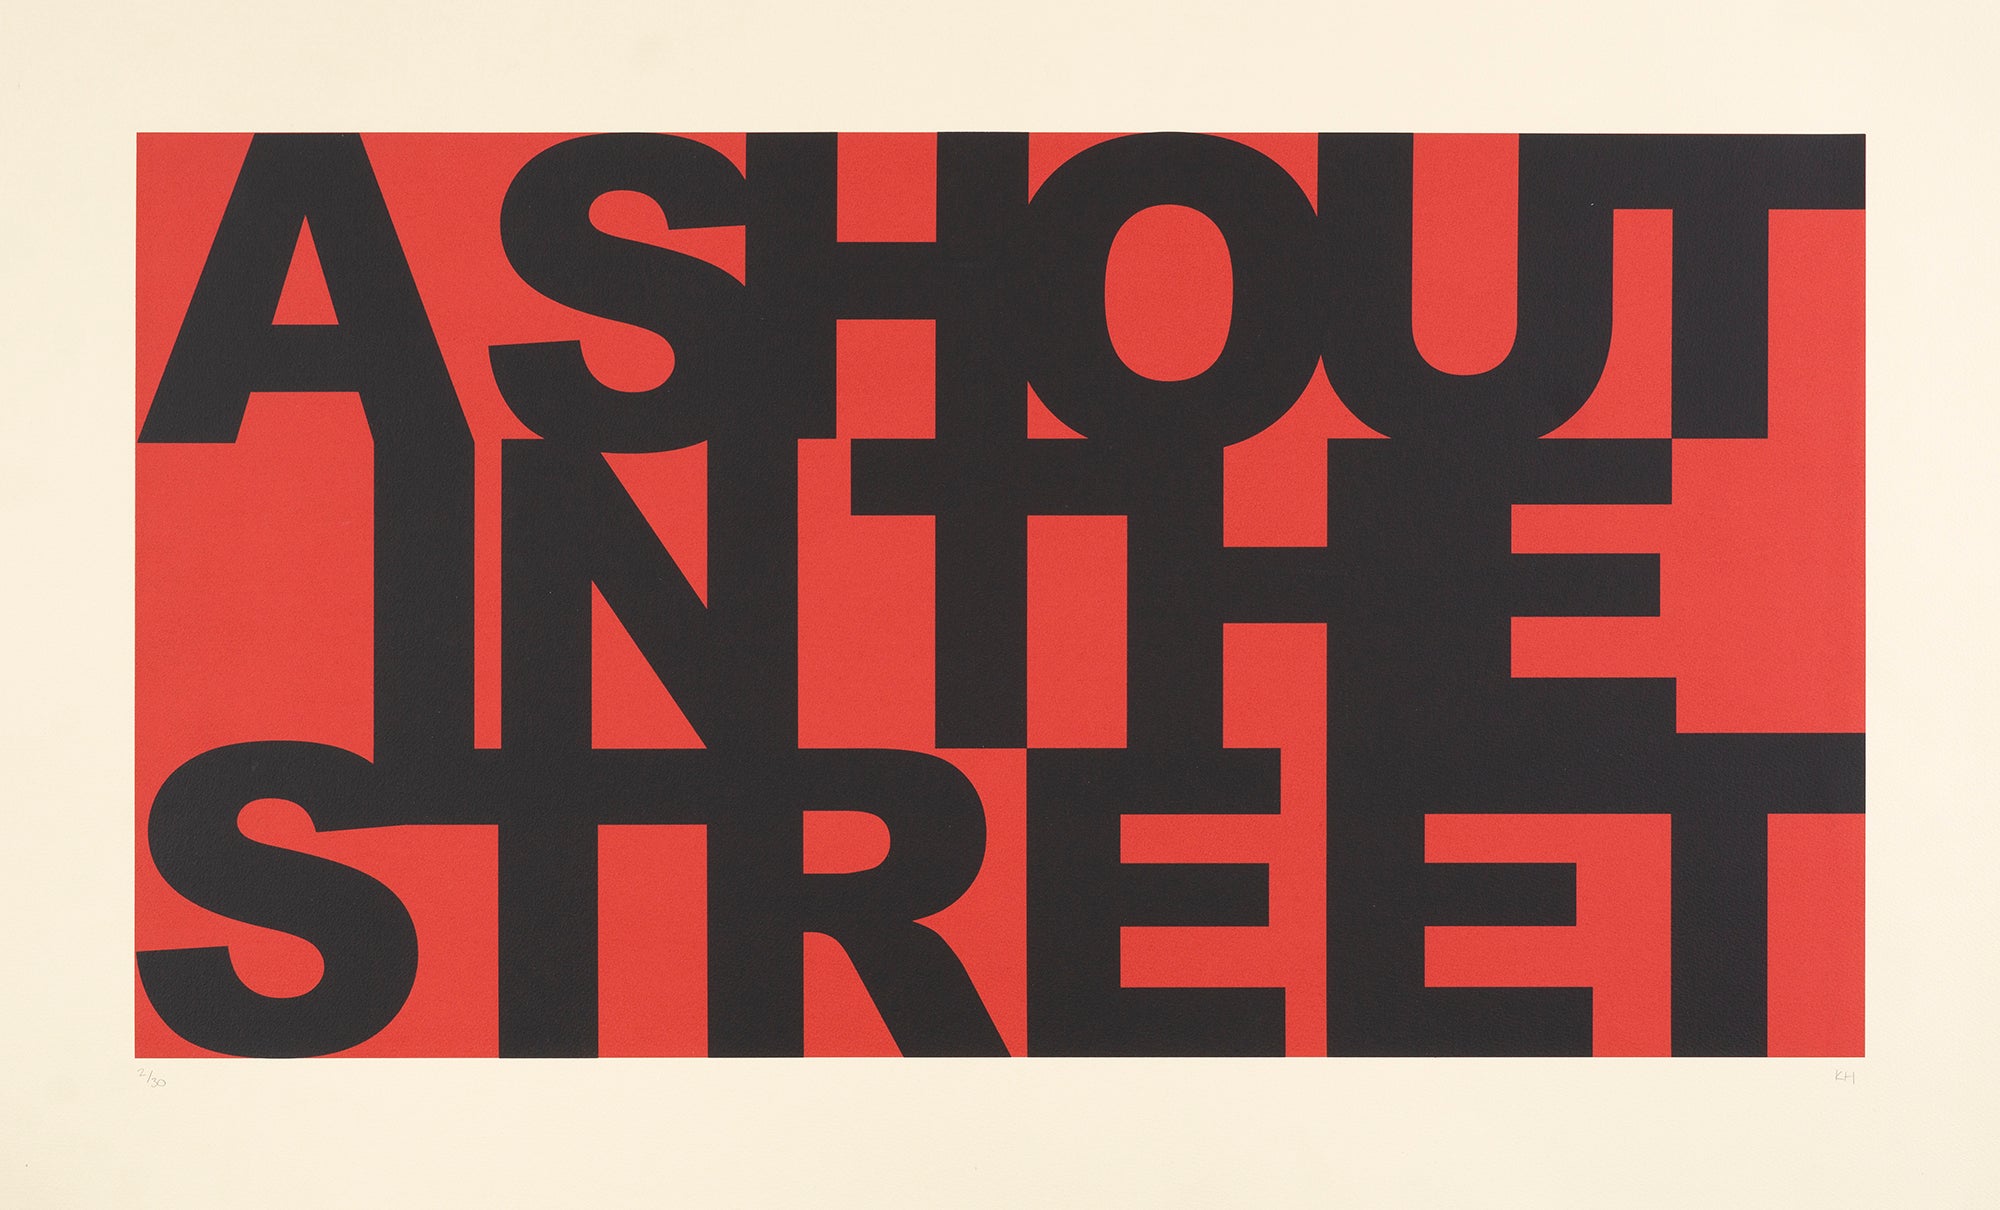 Kenny Hunter: A Shout In The Street